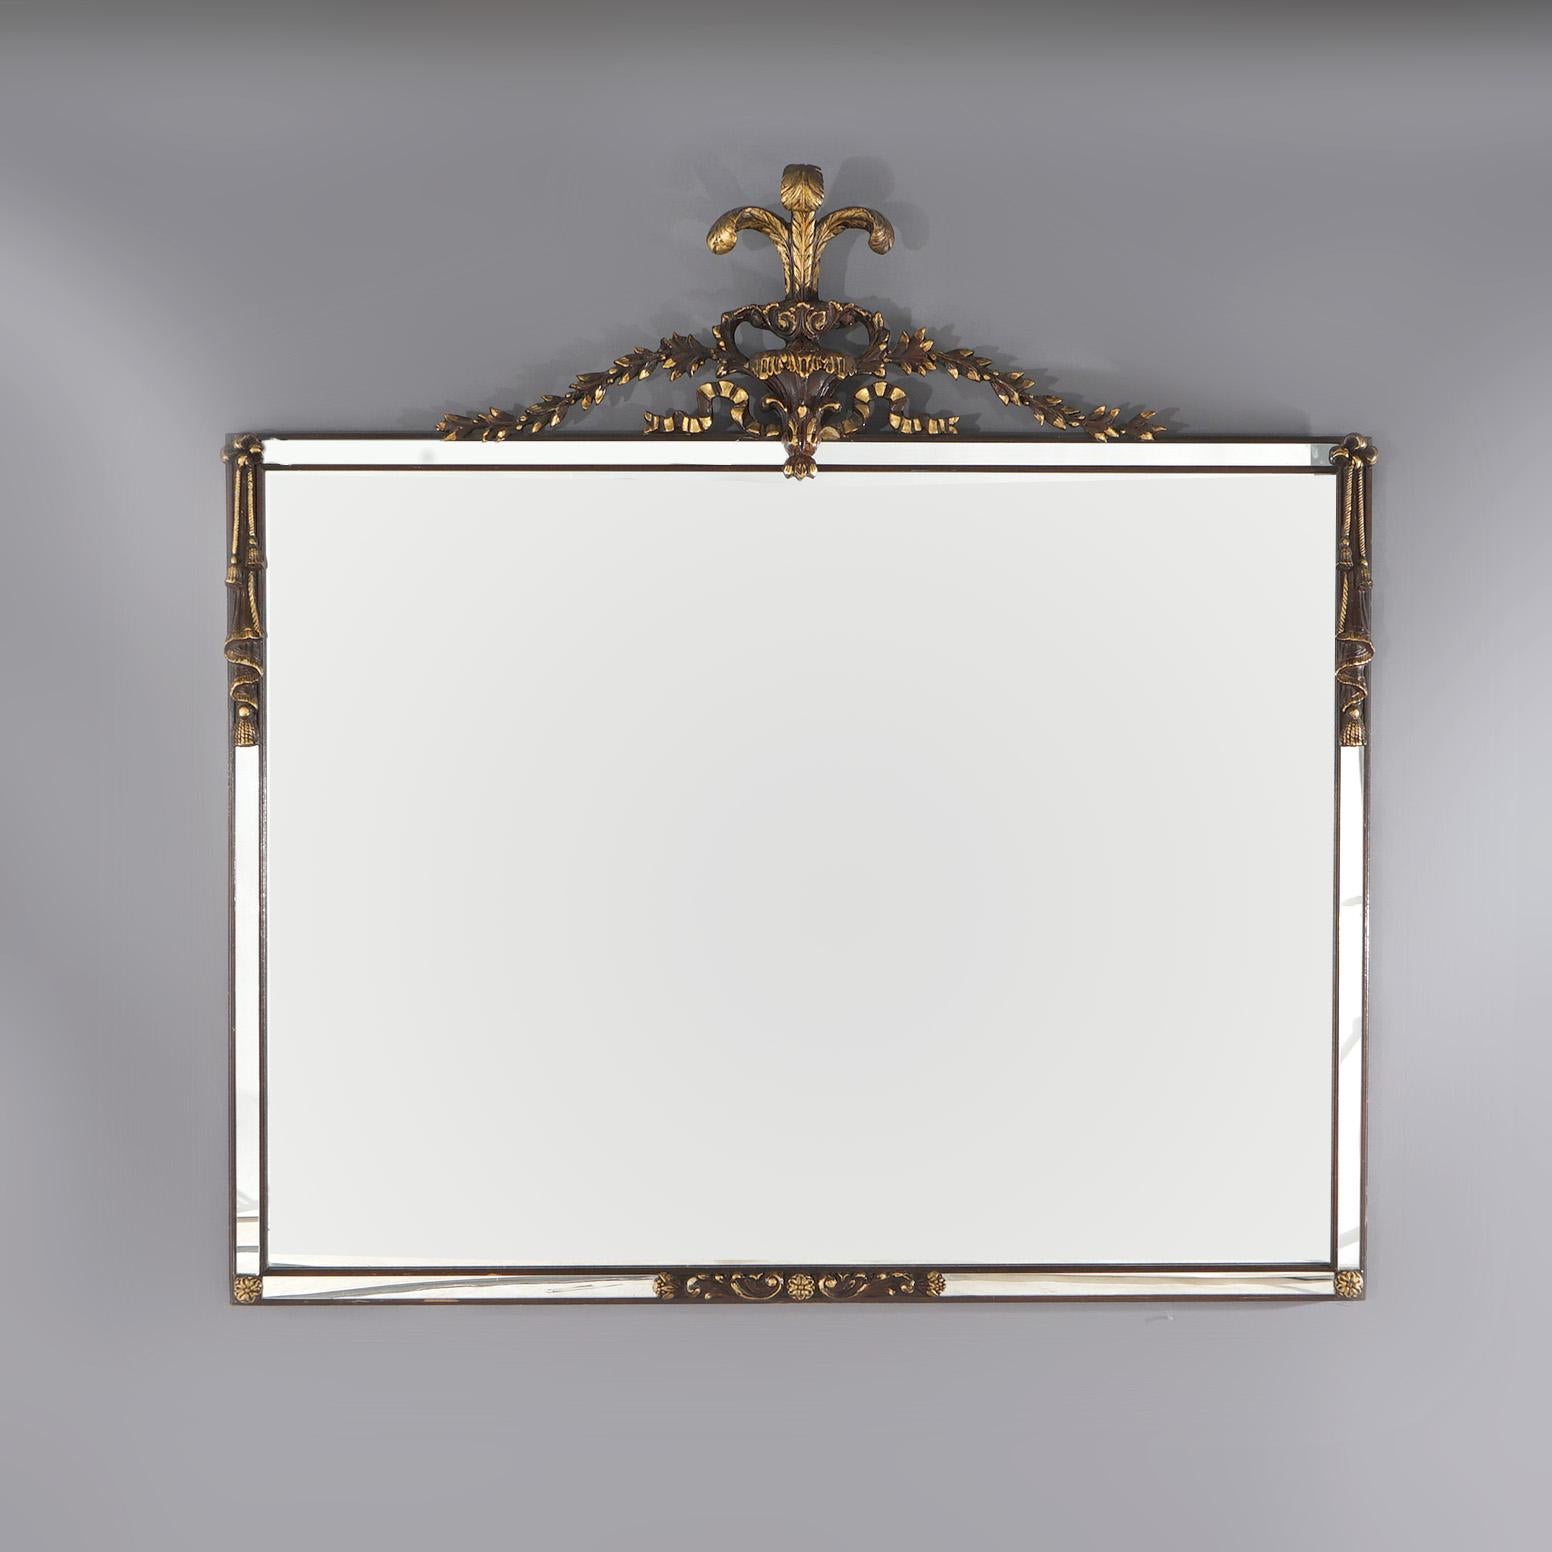 ***Ask About Reduced In-House Shipping Rates - Reliable Service & Fully Insured***

A large French Louis XVI style wall mirror offers fleur de lis and foliate crest over mirror with flanking drape elements, c1920

Measures - 50.25